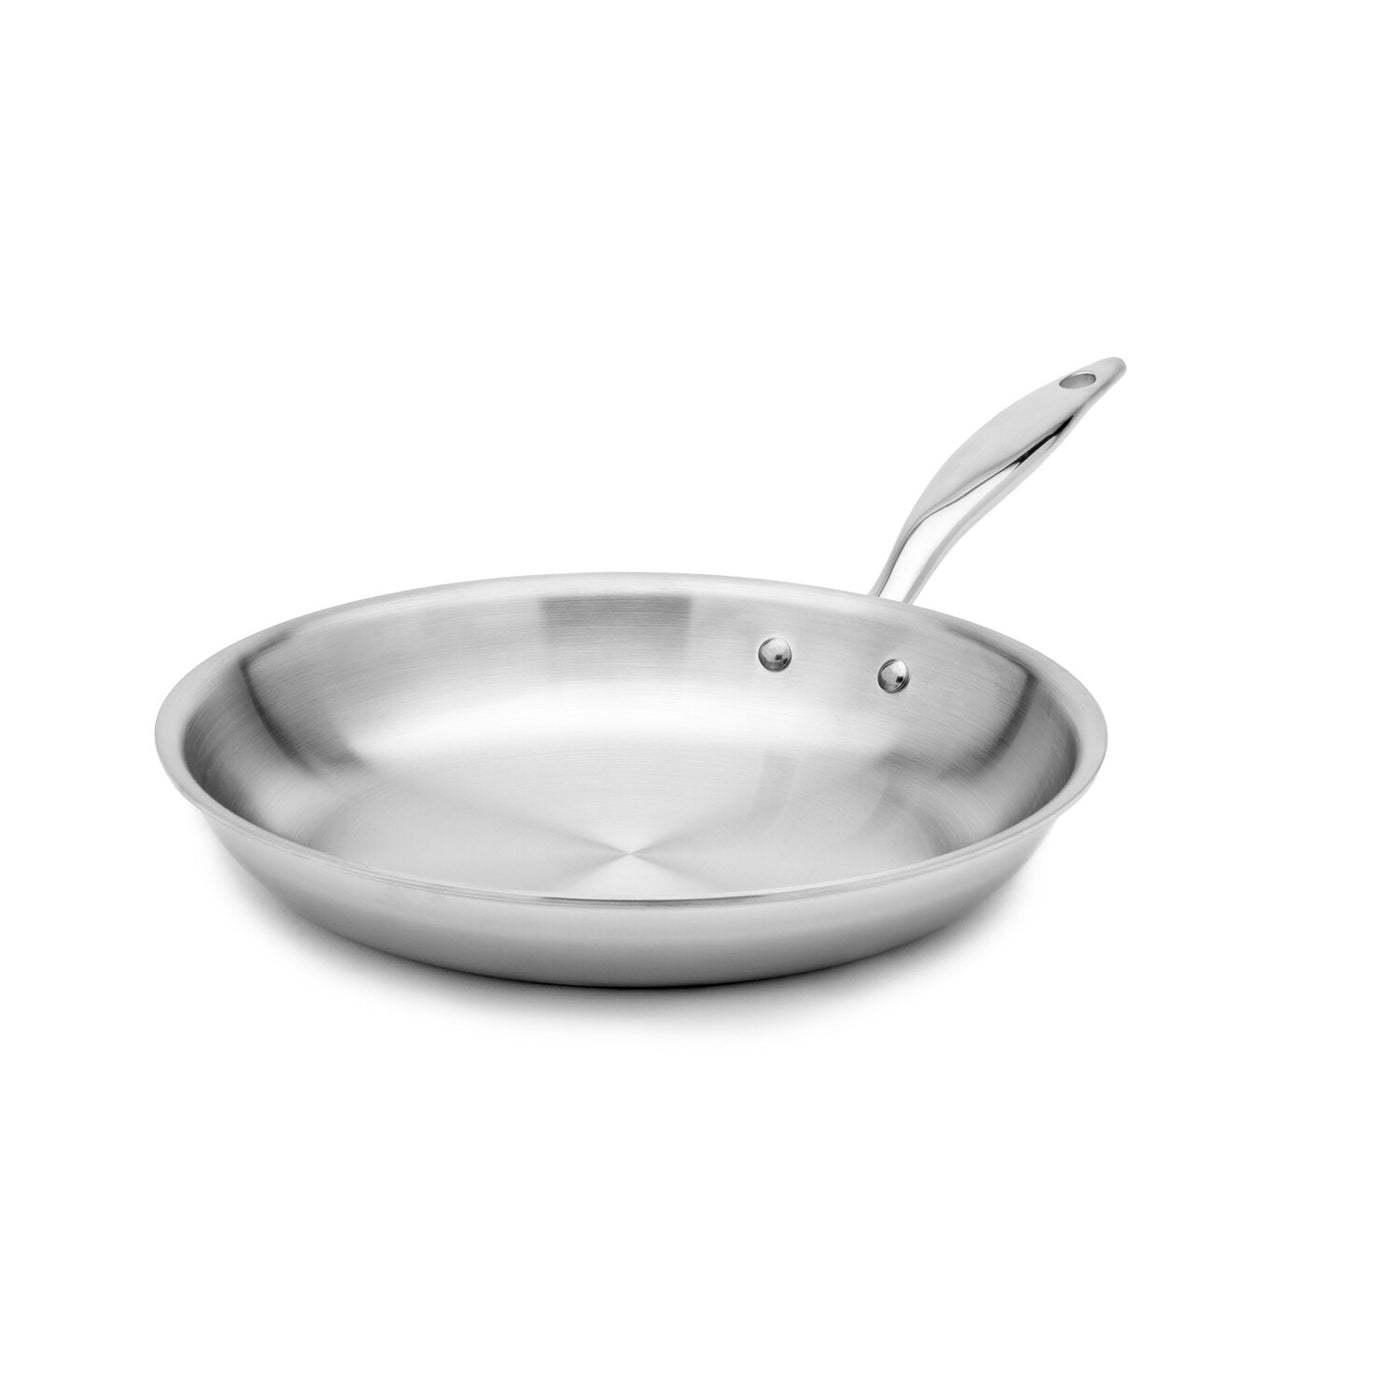 Made In Cookware - 12-Inch Stainless Steel Frying Pan 